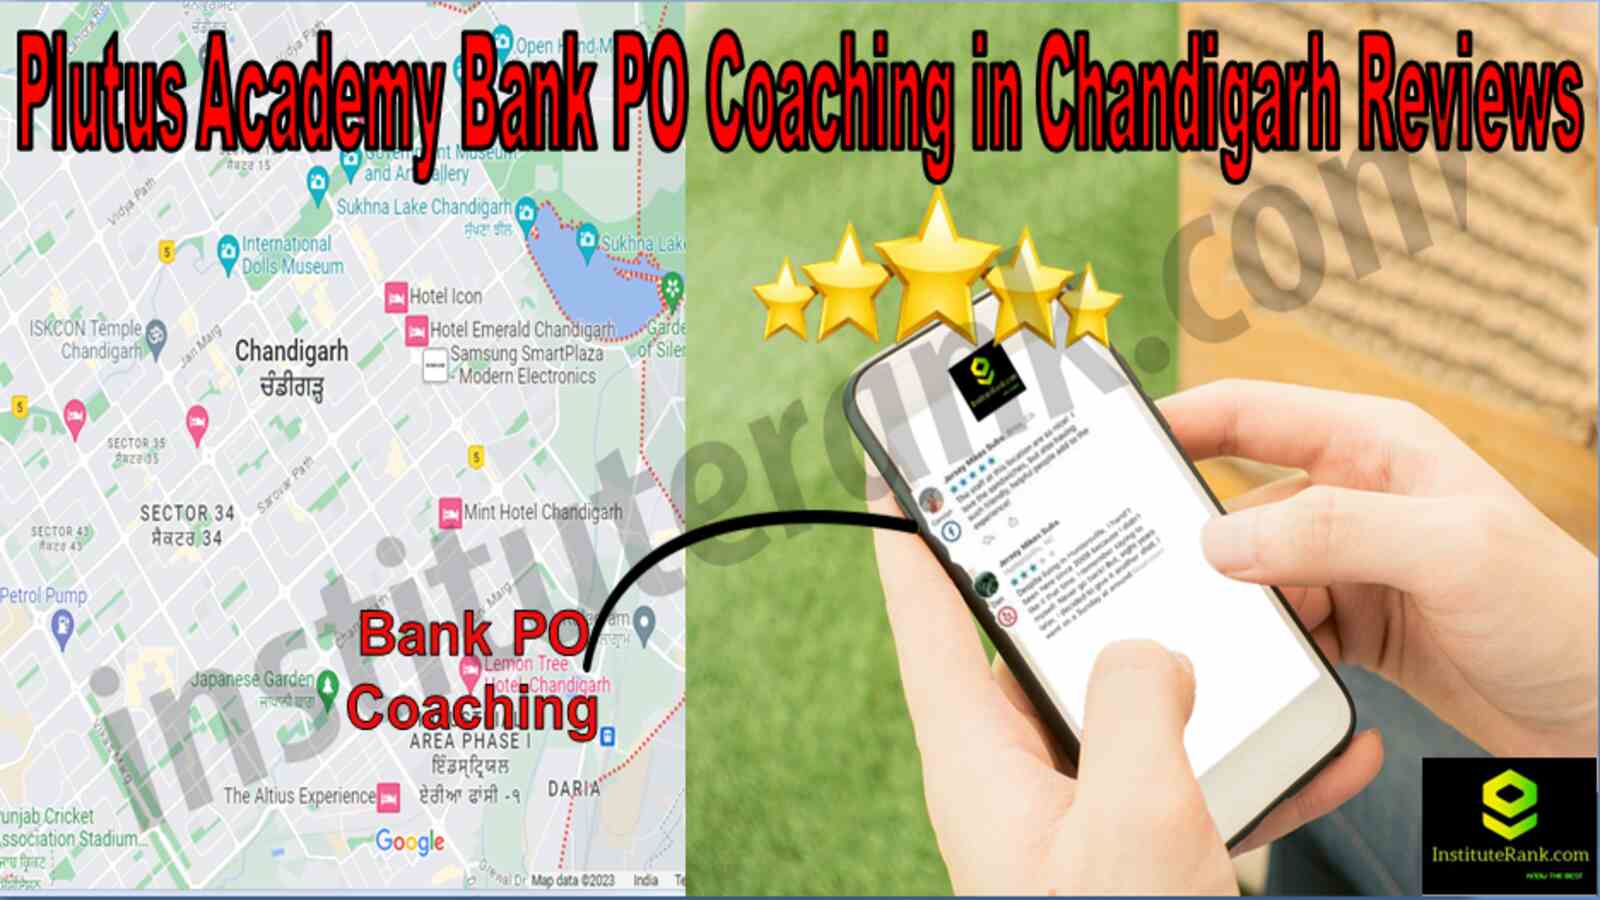 Plutus Academy Bank PO Coaching in Chandigarh Reviews